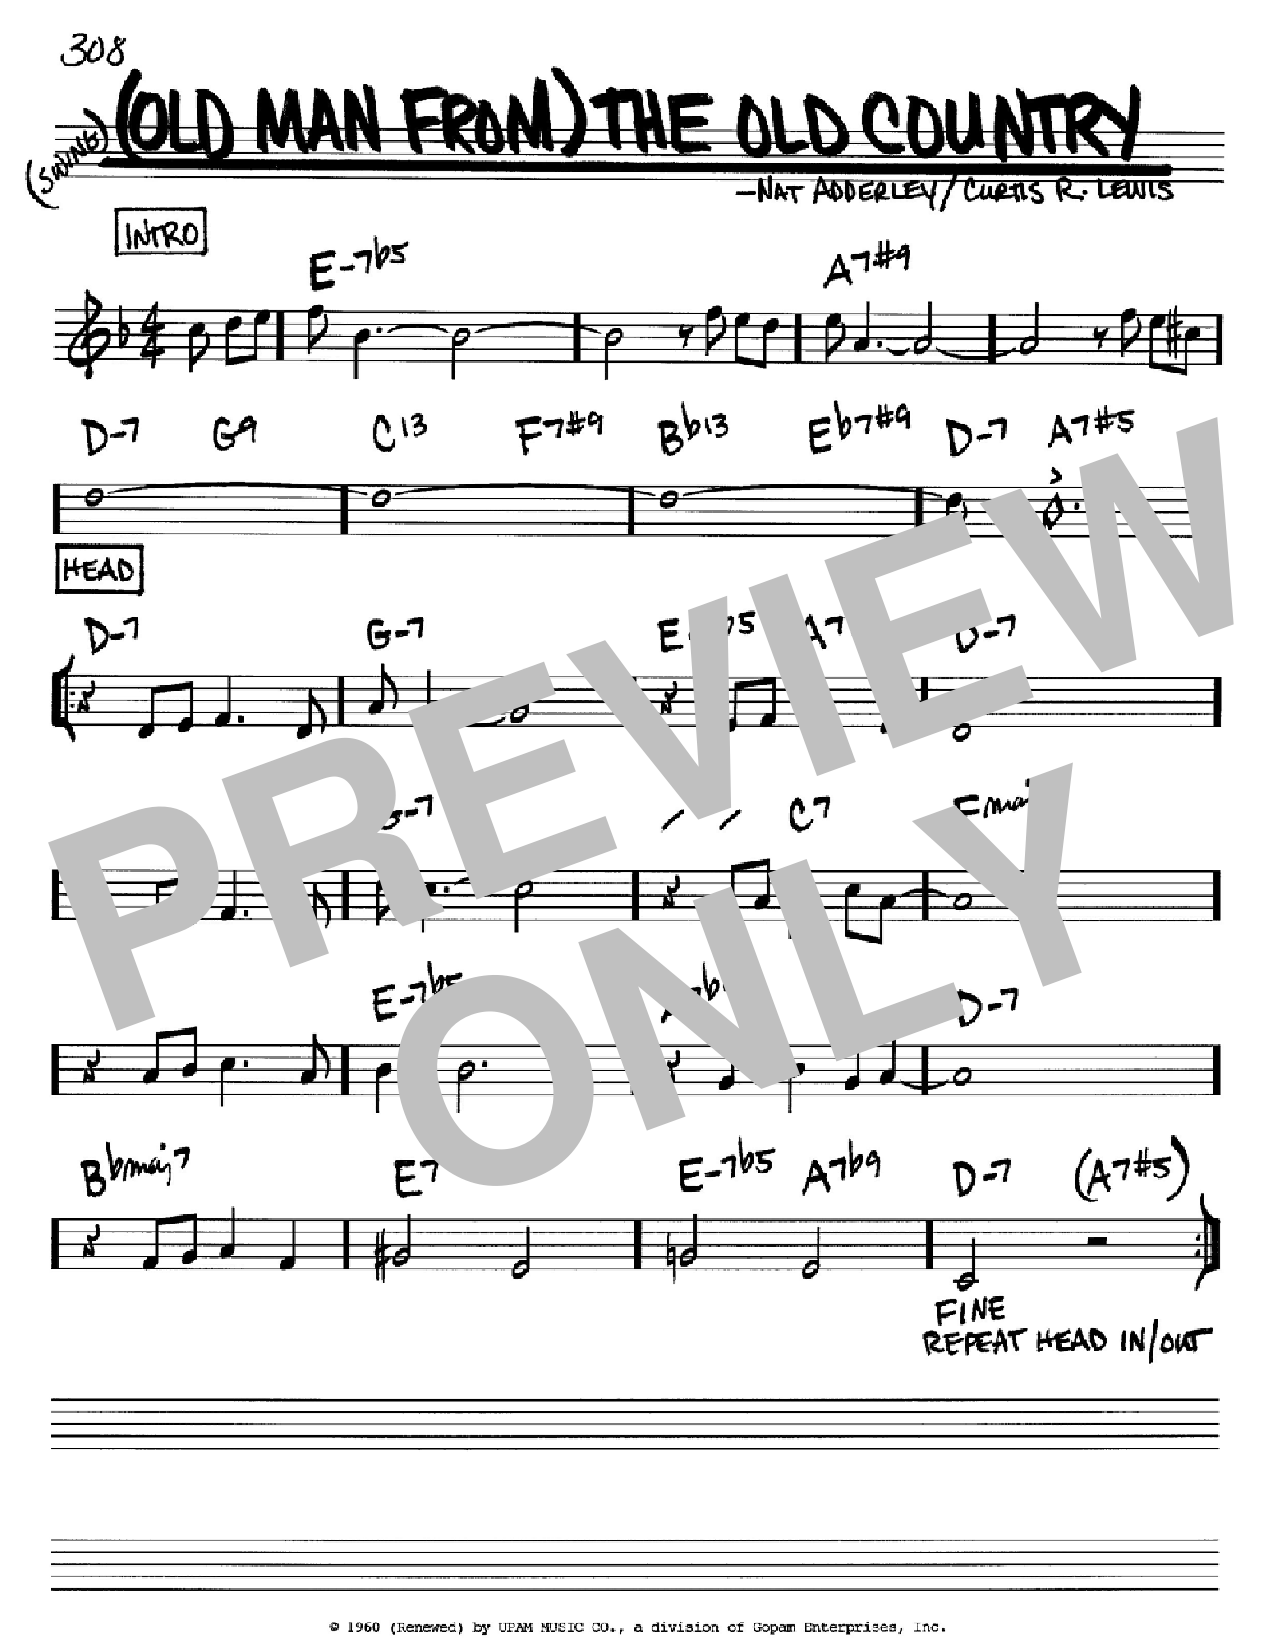 Download Nat Adderley (Old Man From) The Old Country Sheet Music